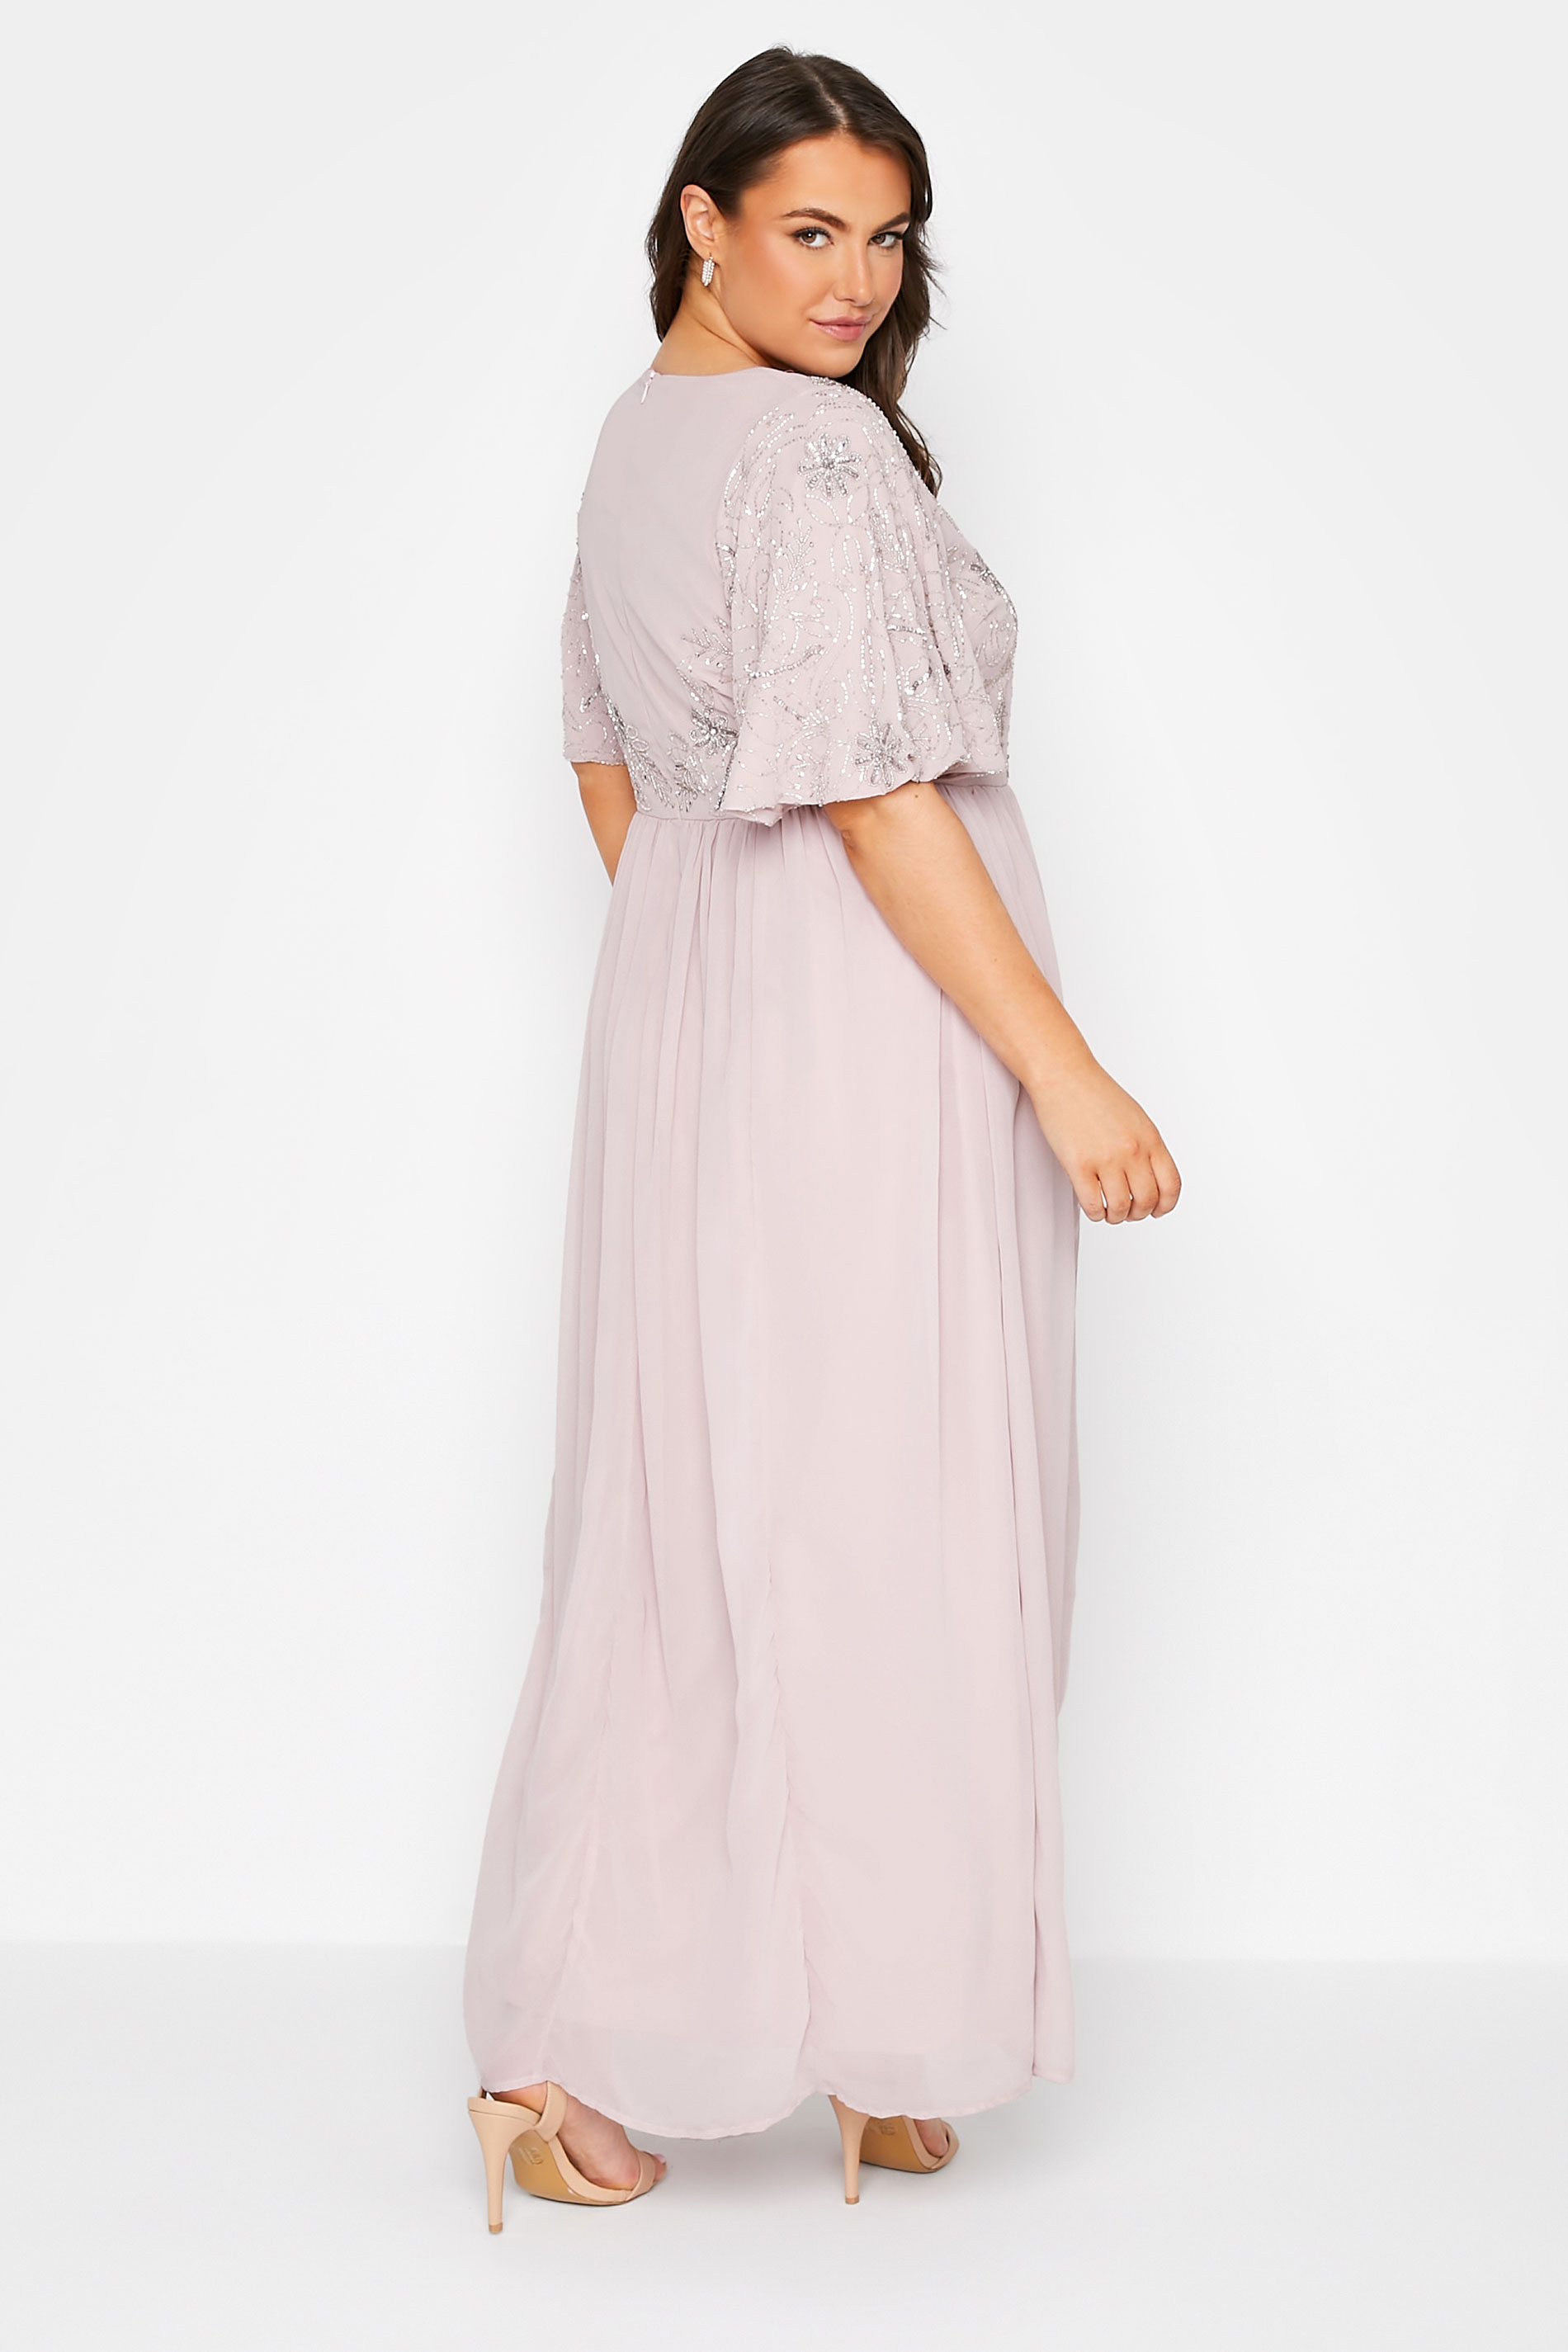 LUXE Plus Size Pink Floral Hand Embellished Maxi Dress | Yours Clothing 3